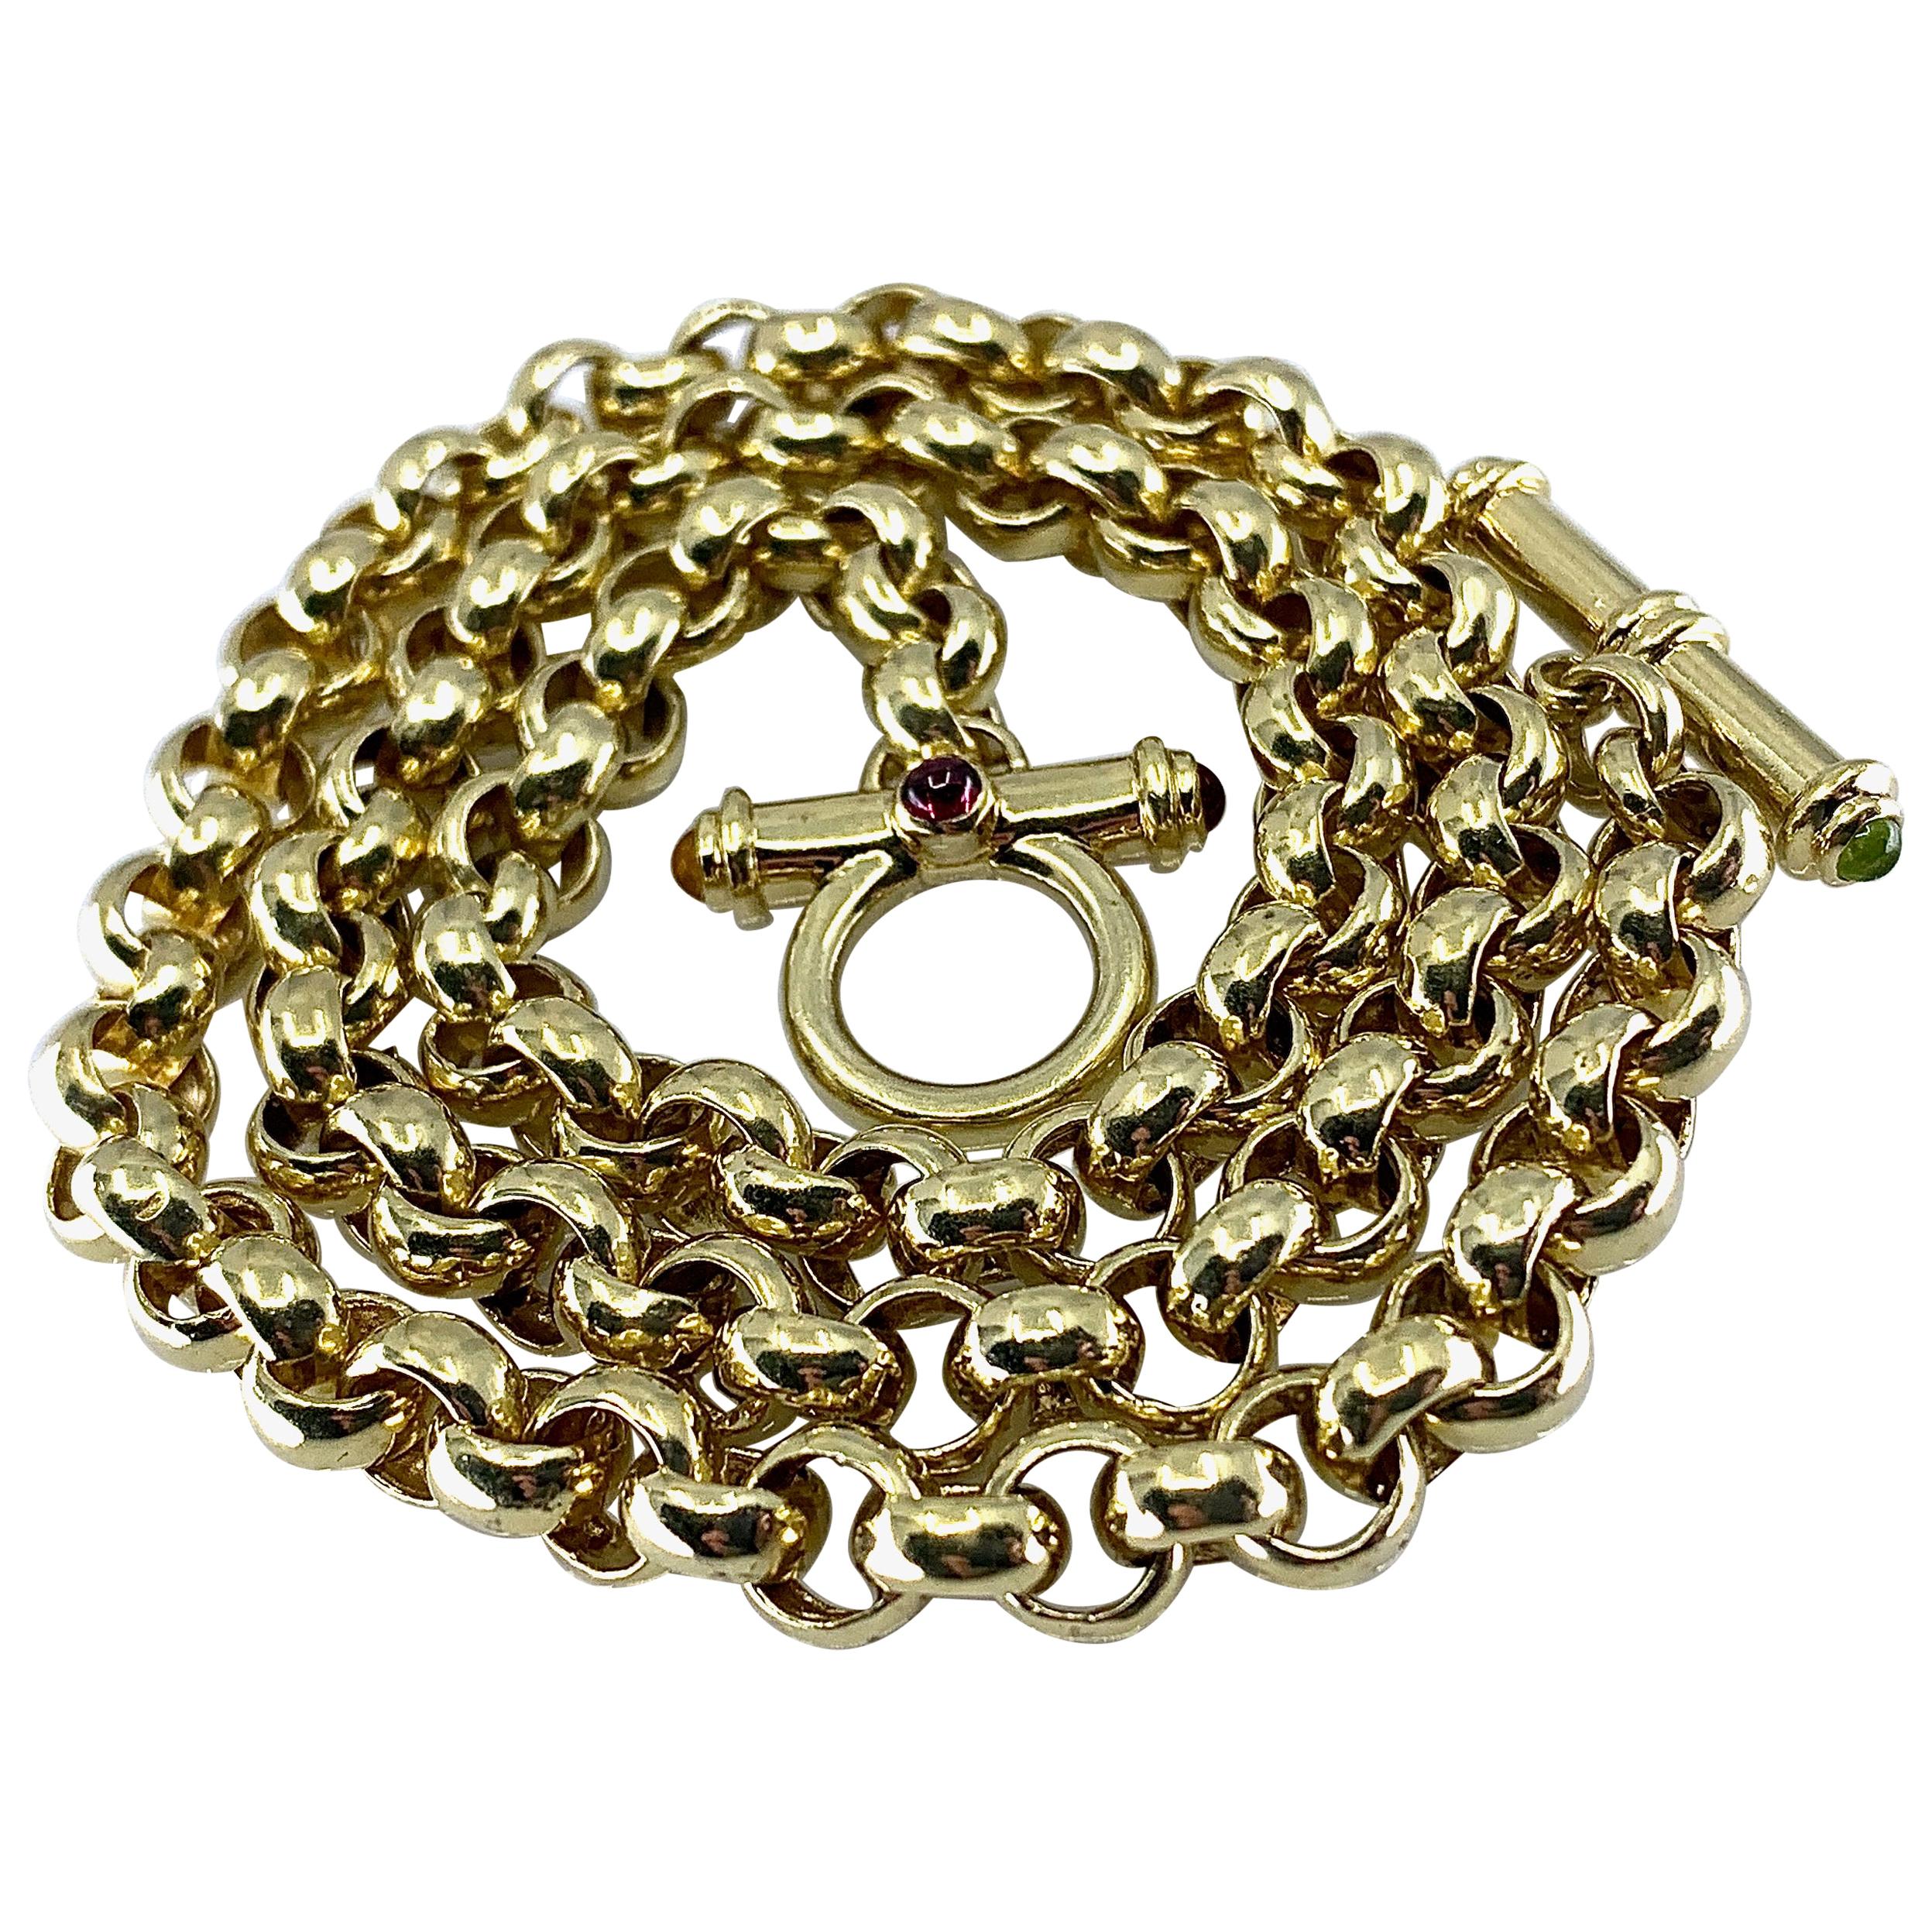 Yellow Gold Chain Necklace with Gemstone-Tipped Toggle Clasp